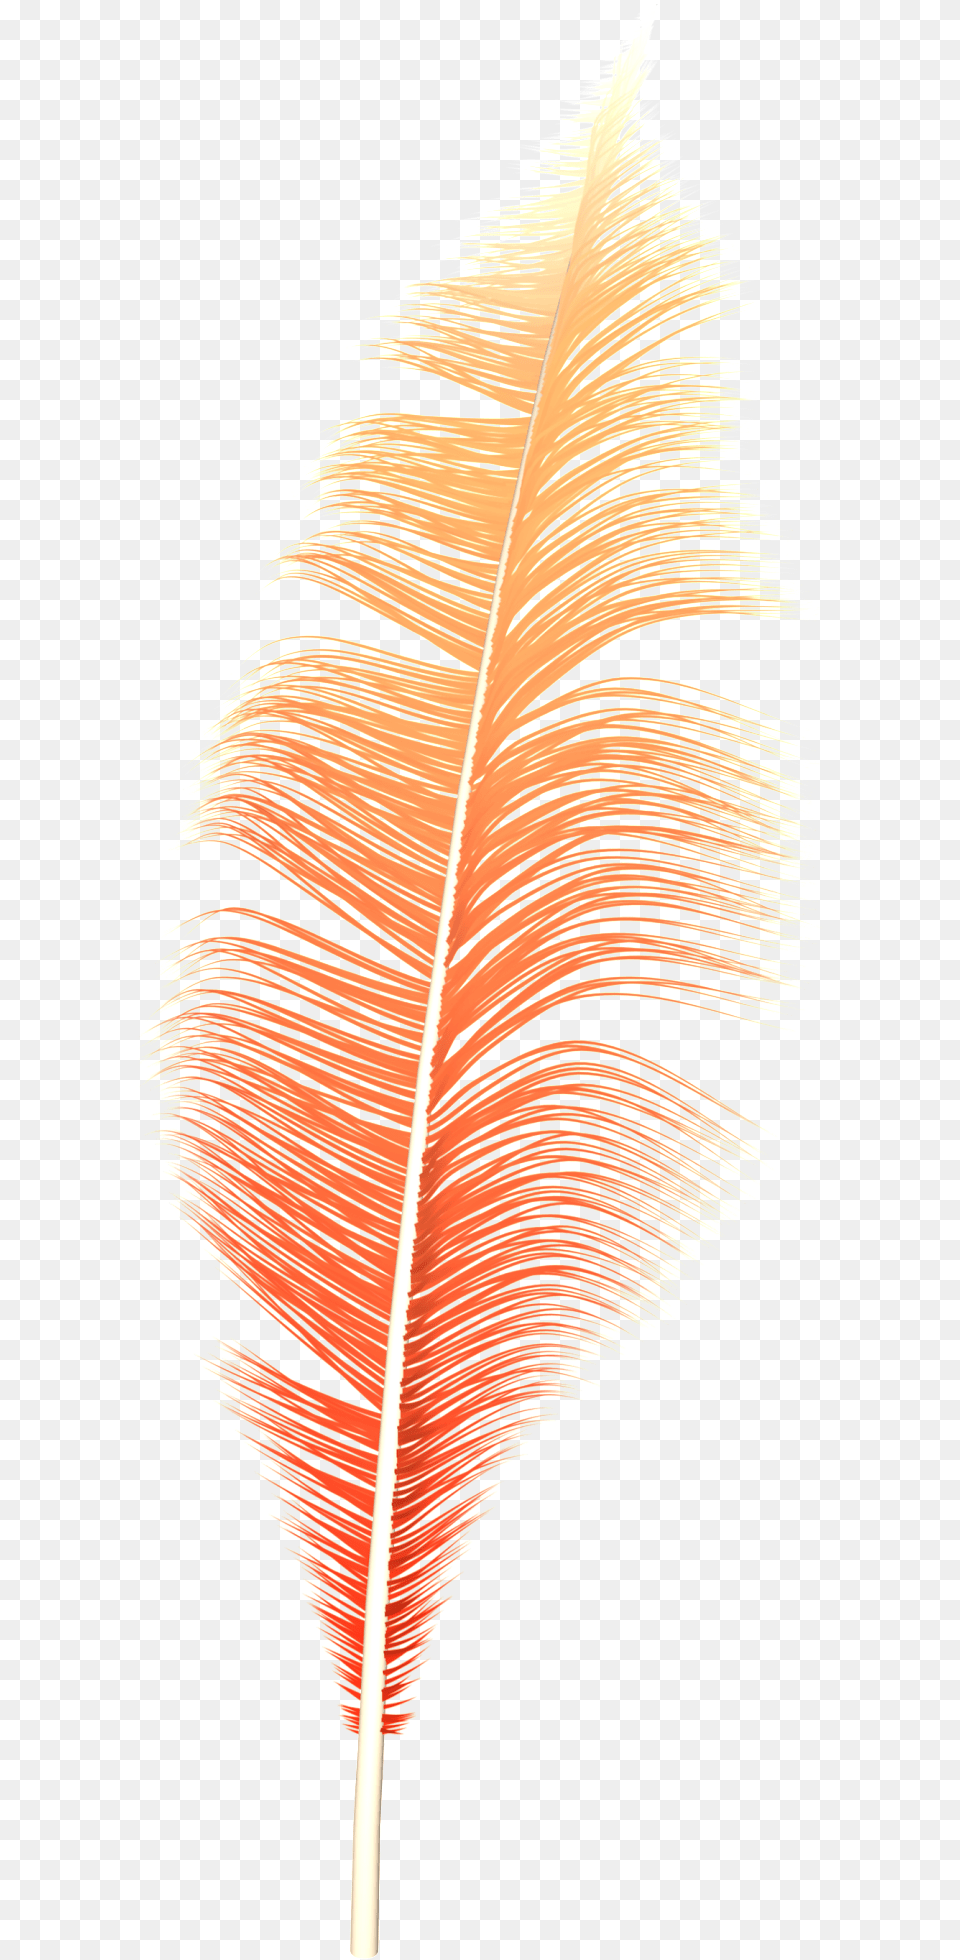 Dream Feather Portable Network Graphics, Leaf, Plant, Reed, Animal Png